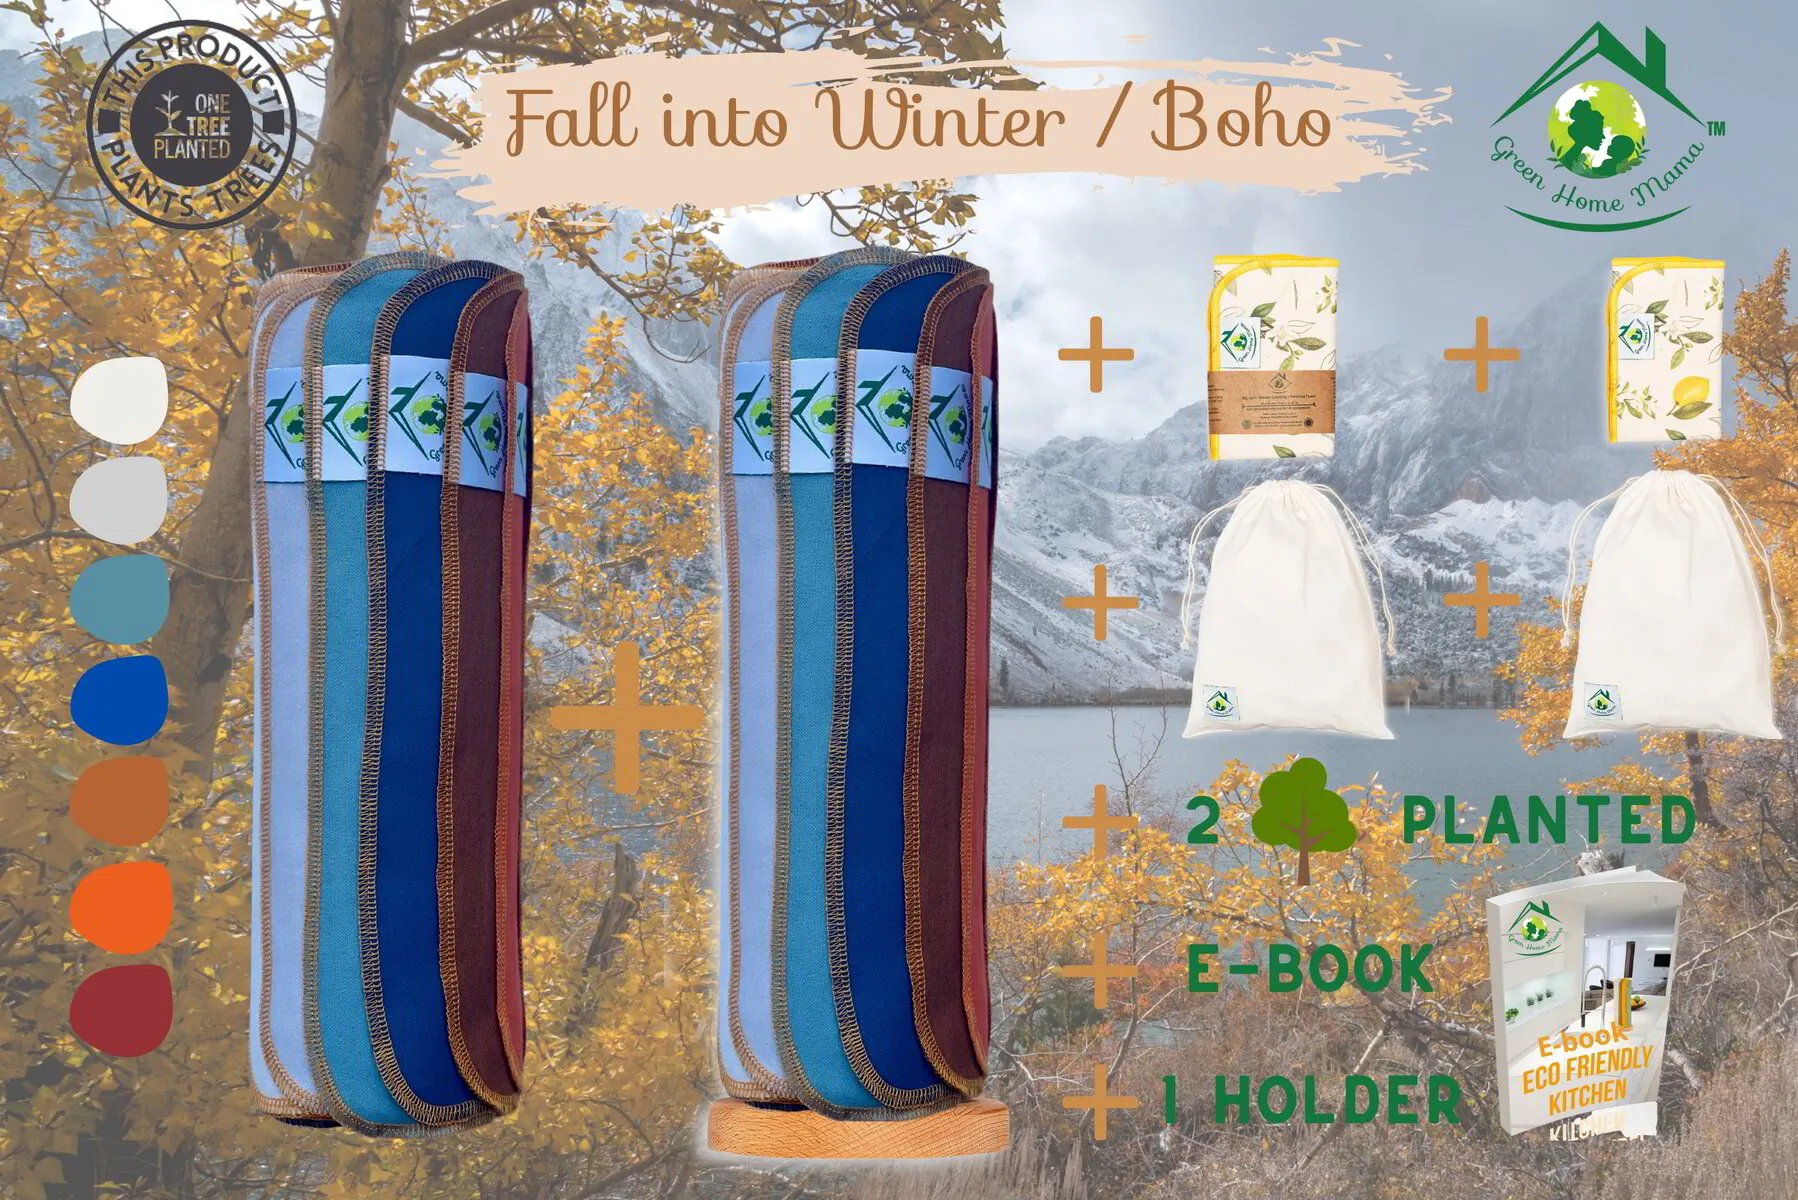 FALL INTO WINTER BUNDLE 2 Rolls of 28 Reusable Unpaper Towels + Two 2-ply towels, 2 cotton bags, 1 holder, 1 E-book, 2 trees planted